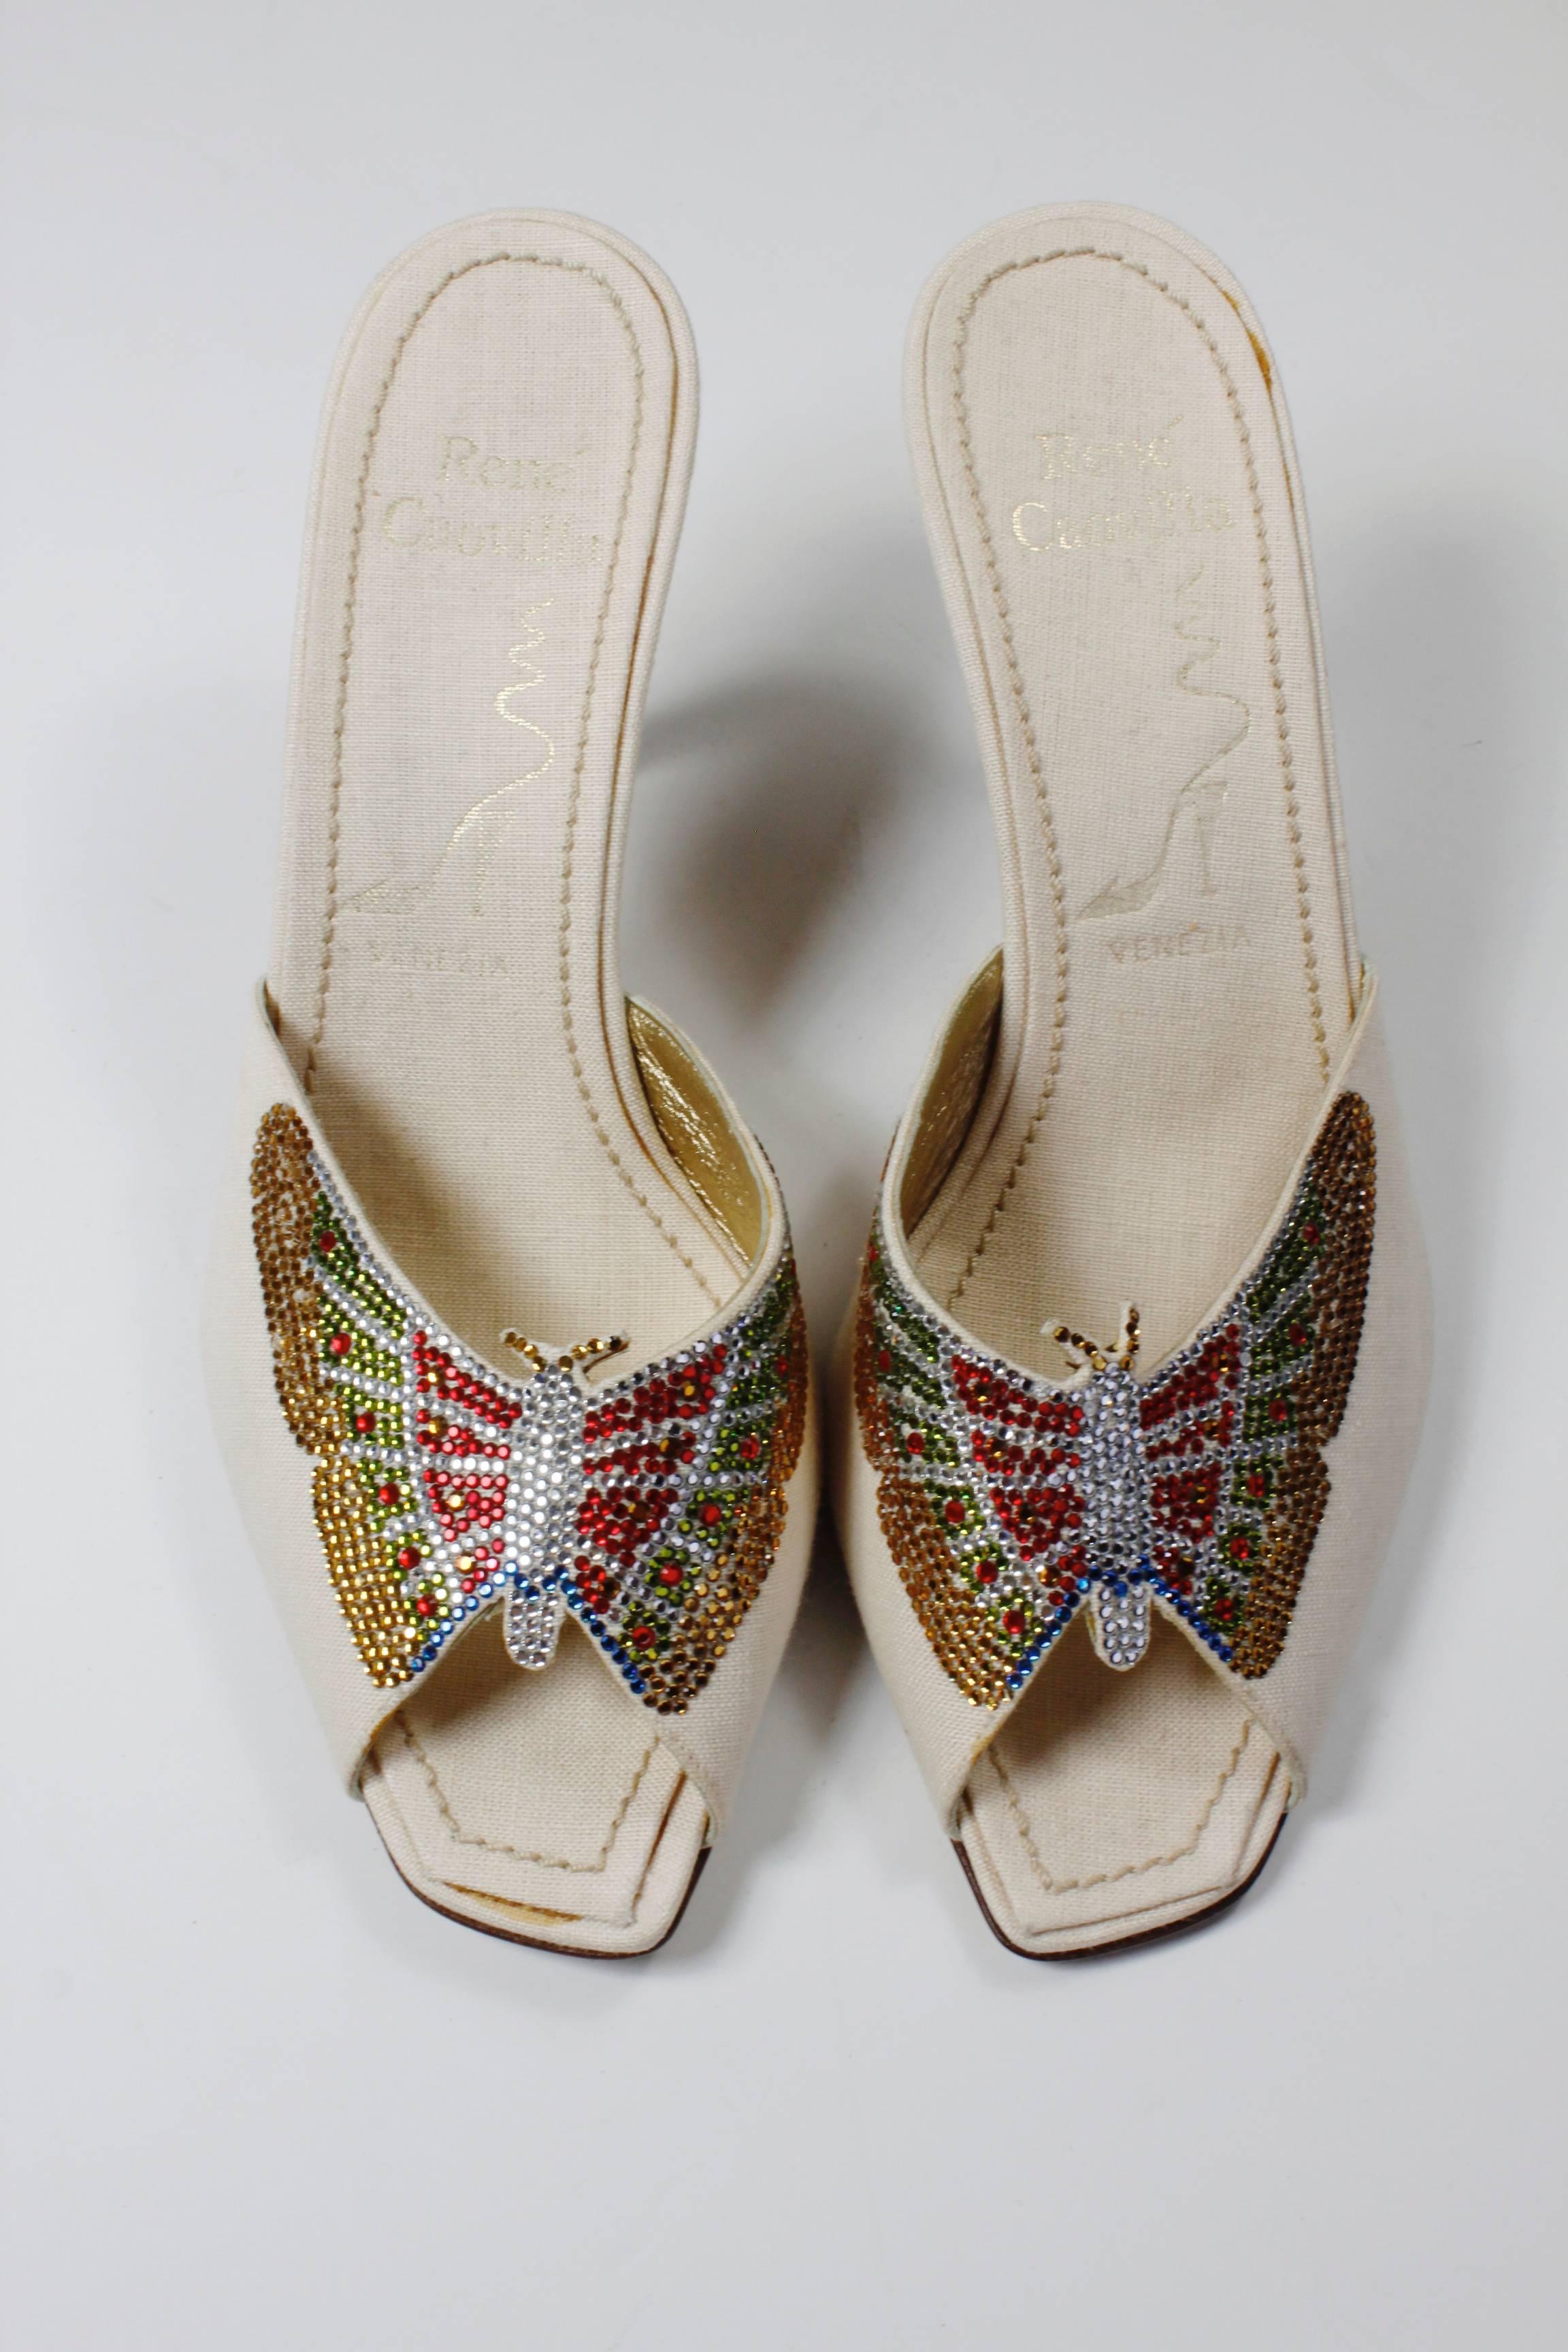 These fabulous cream mules from René Caovilla feature beautiful butterflies spreading their rhinestone wings across the shoe. 

Marked a size 38.